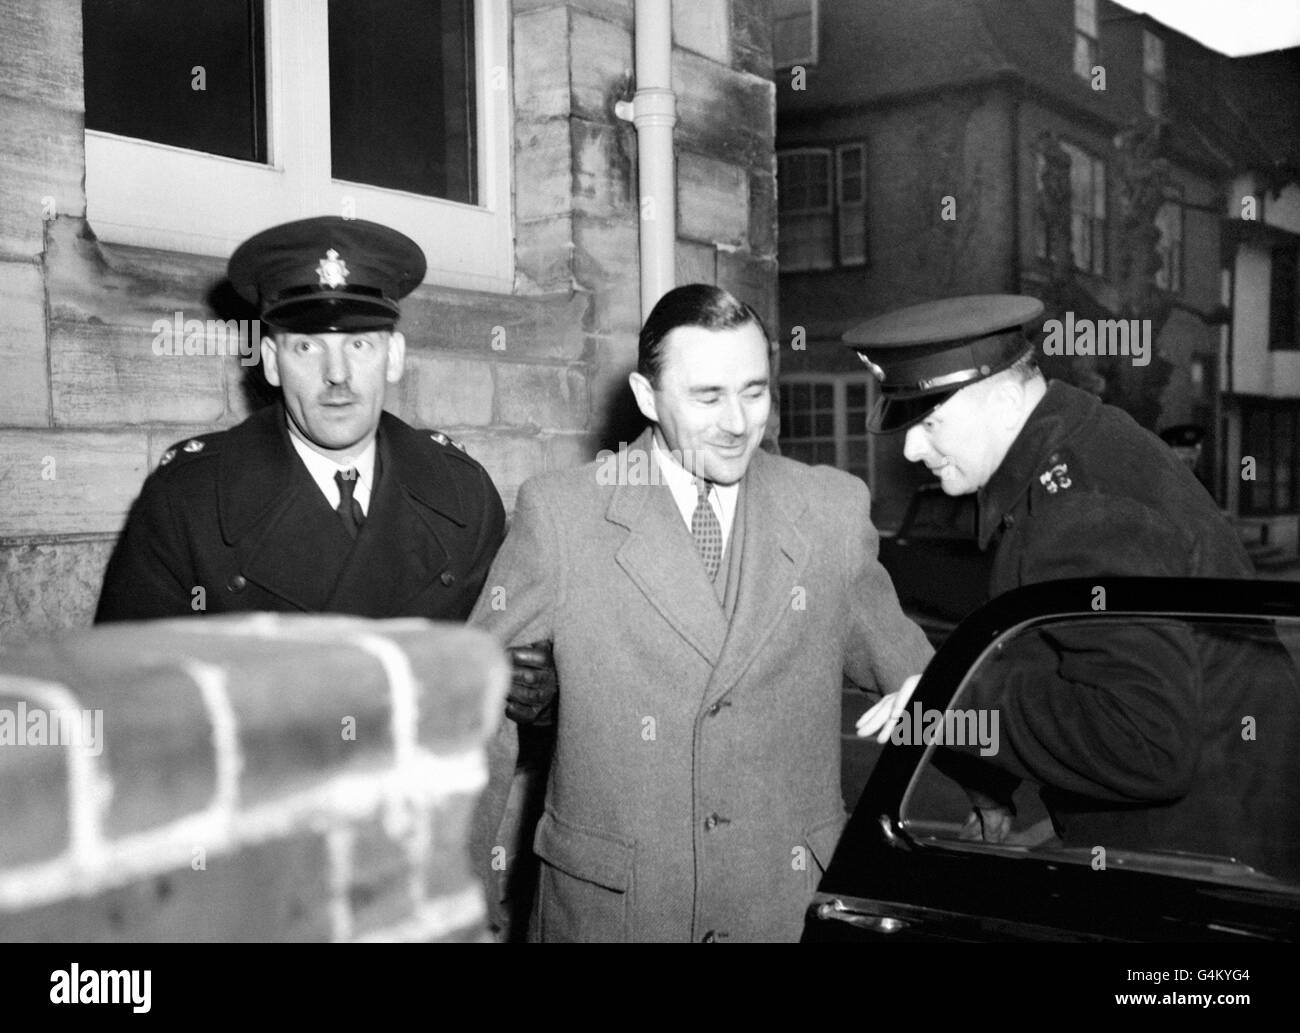 John George Haigh under police escort at Horsham Magistrates' Court, Sussex, after being put on remand for the murder of Mrs Olive Durand-Deacon, one of the victims of the so-called 'Acid Bath Murders'. Haigh was later executed for his crimes. Stock Photo